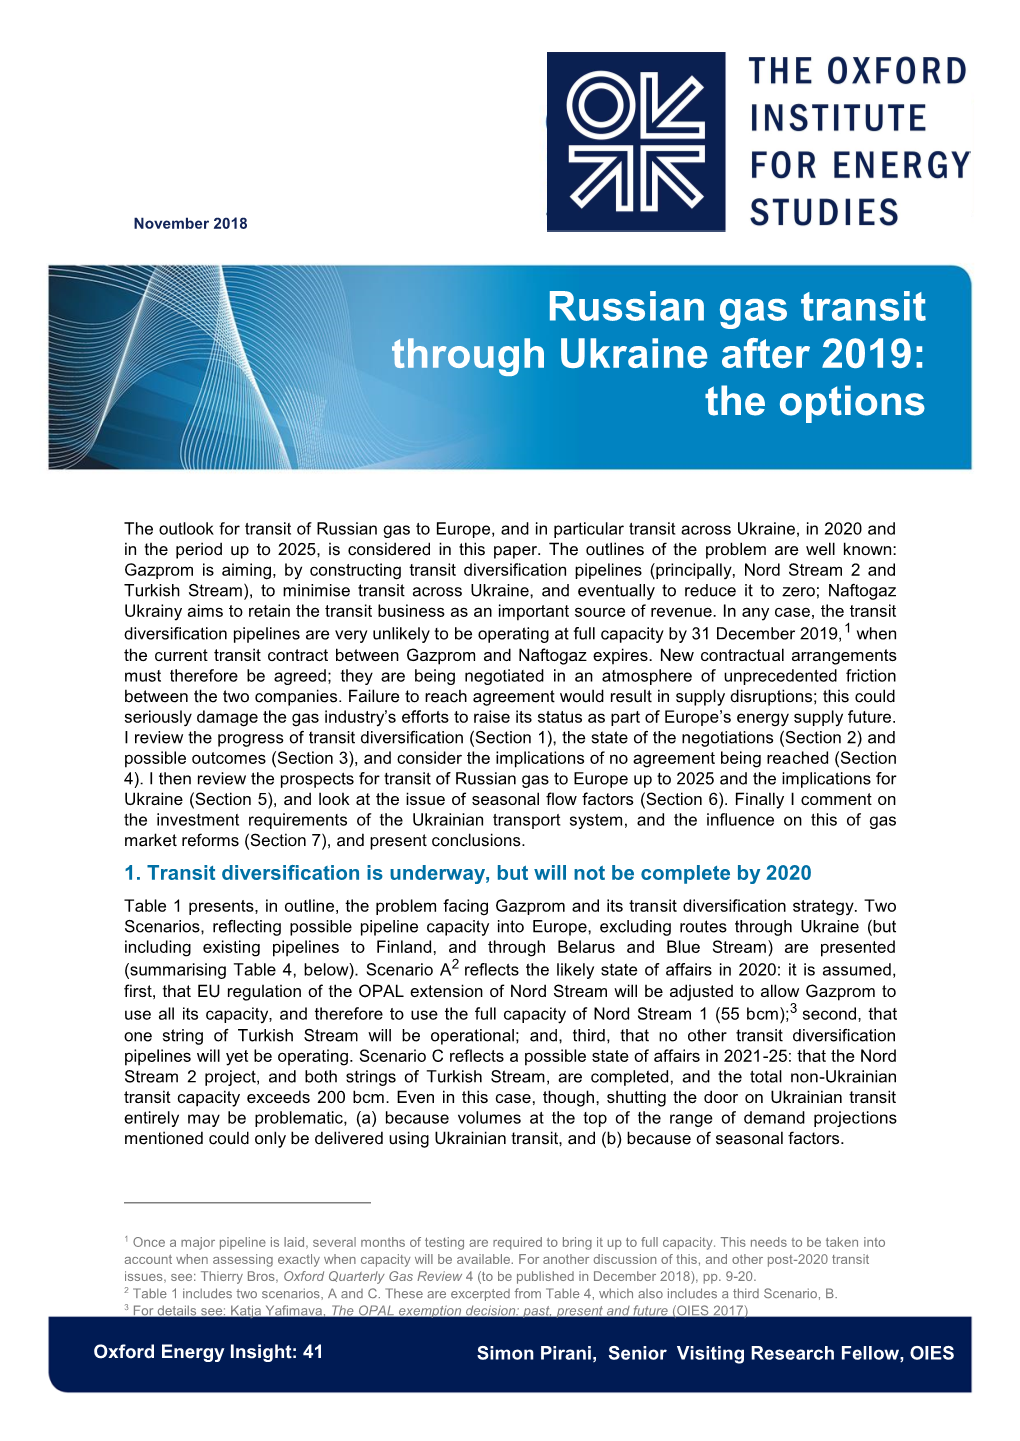 Russian Gas Transit Through Ukraine After 2019: the Options